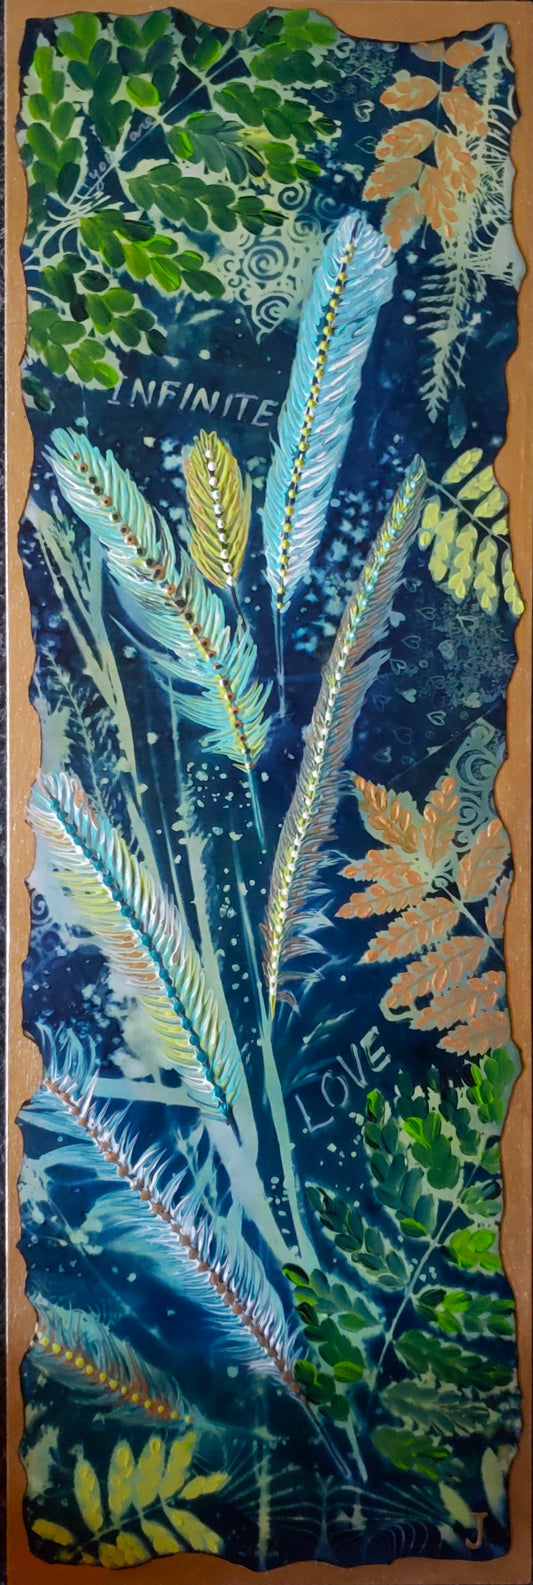 Original Artwork sunprint cyanotype mixed media of leaves and feathers in blues and greens with goldcalled You Are Infinite Love